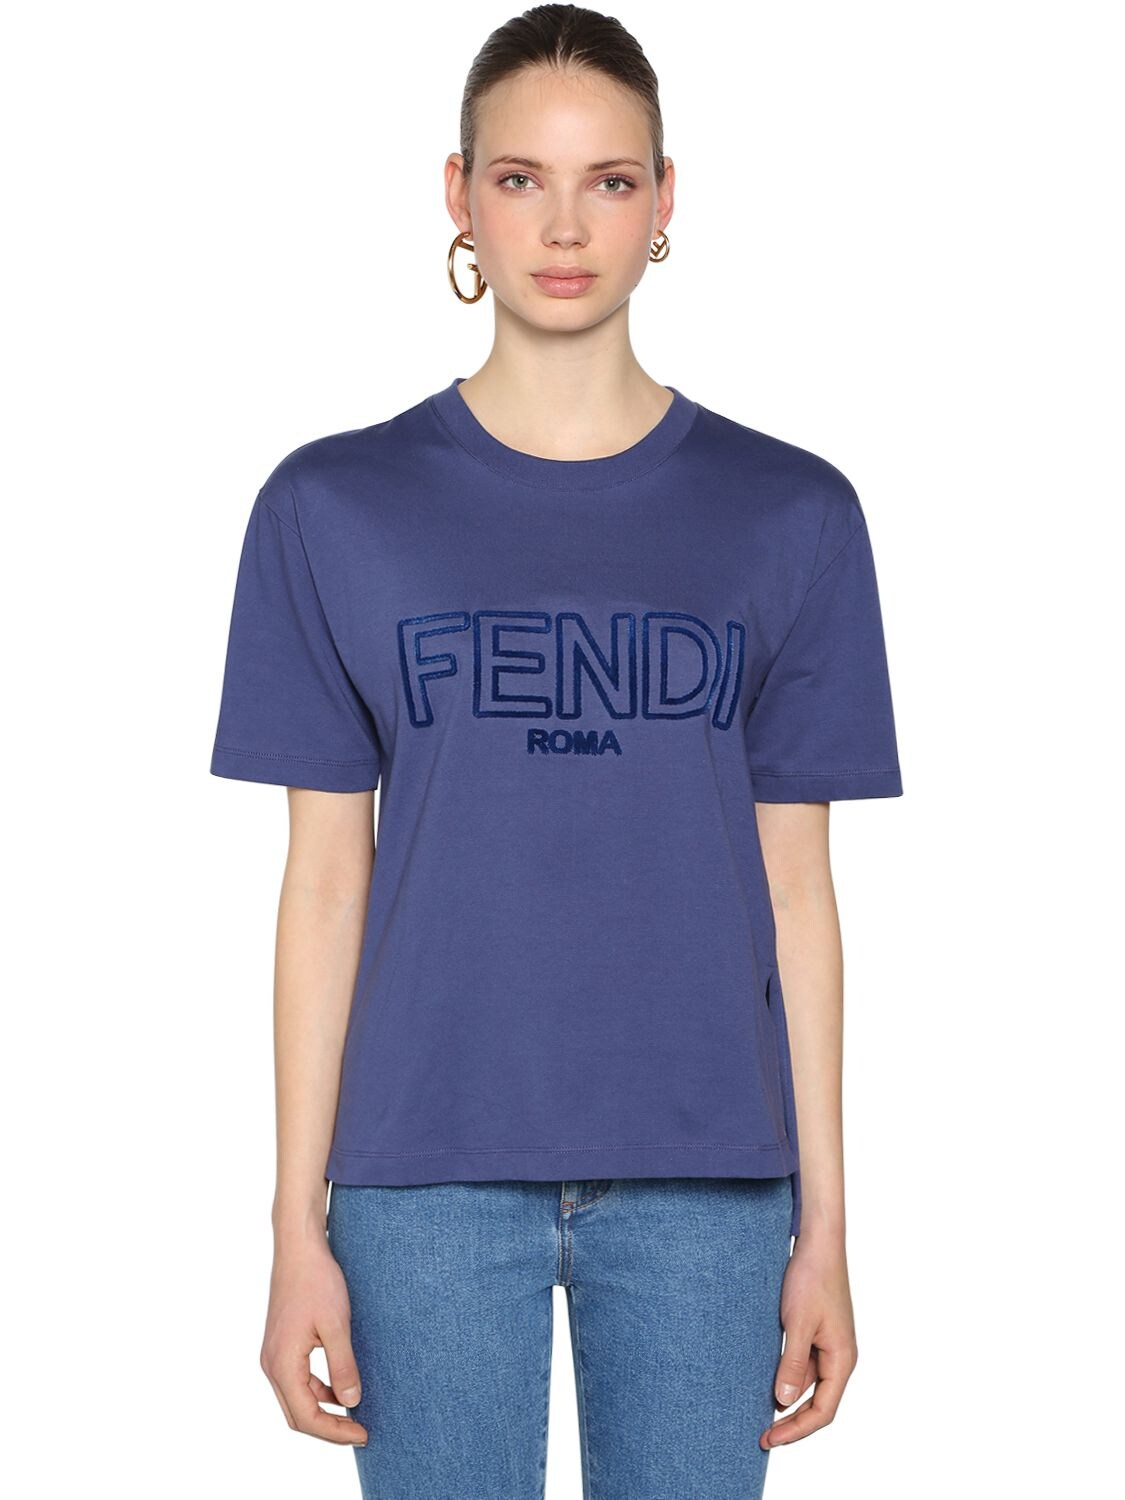 FENDI OVERSIZE LOGO EMBROIDERED JERSEY T-SHIRT,68IW0R003-RjEyUUE1